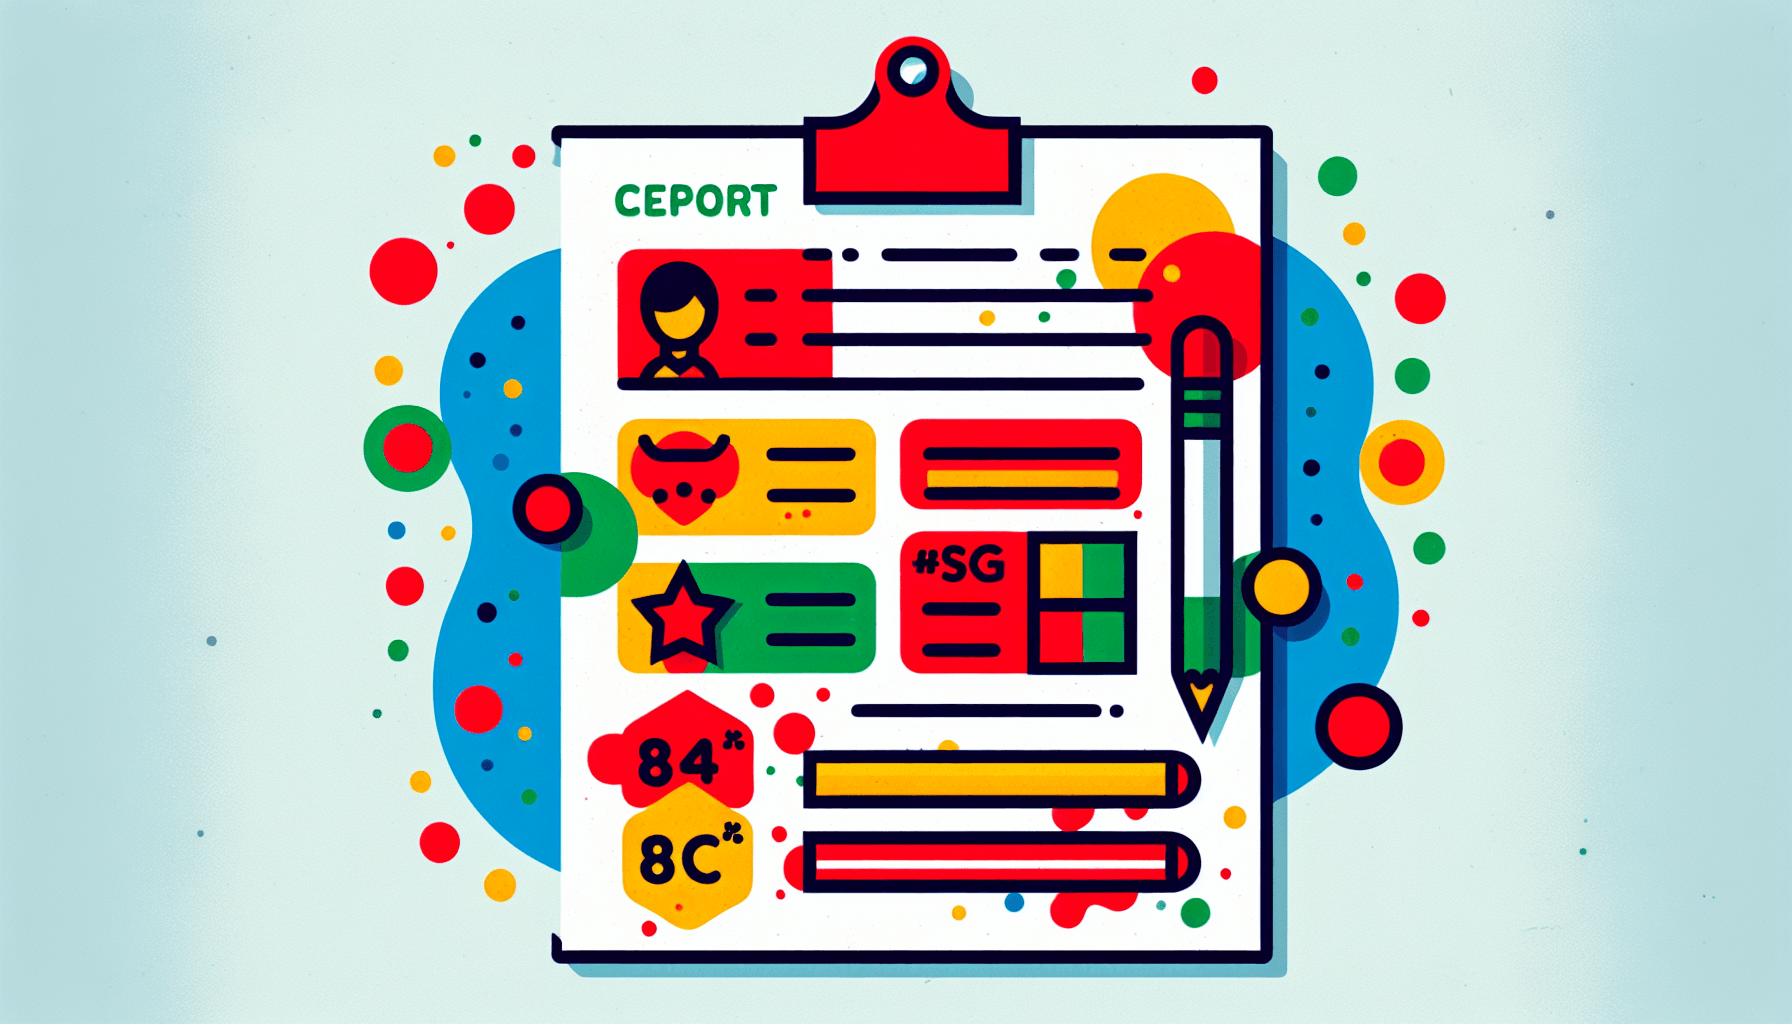 Report card in flat illustration style and white background, red #f47574, green #88c7a8, yellow #fcc44b, and blue #645bc8 colors.